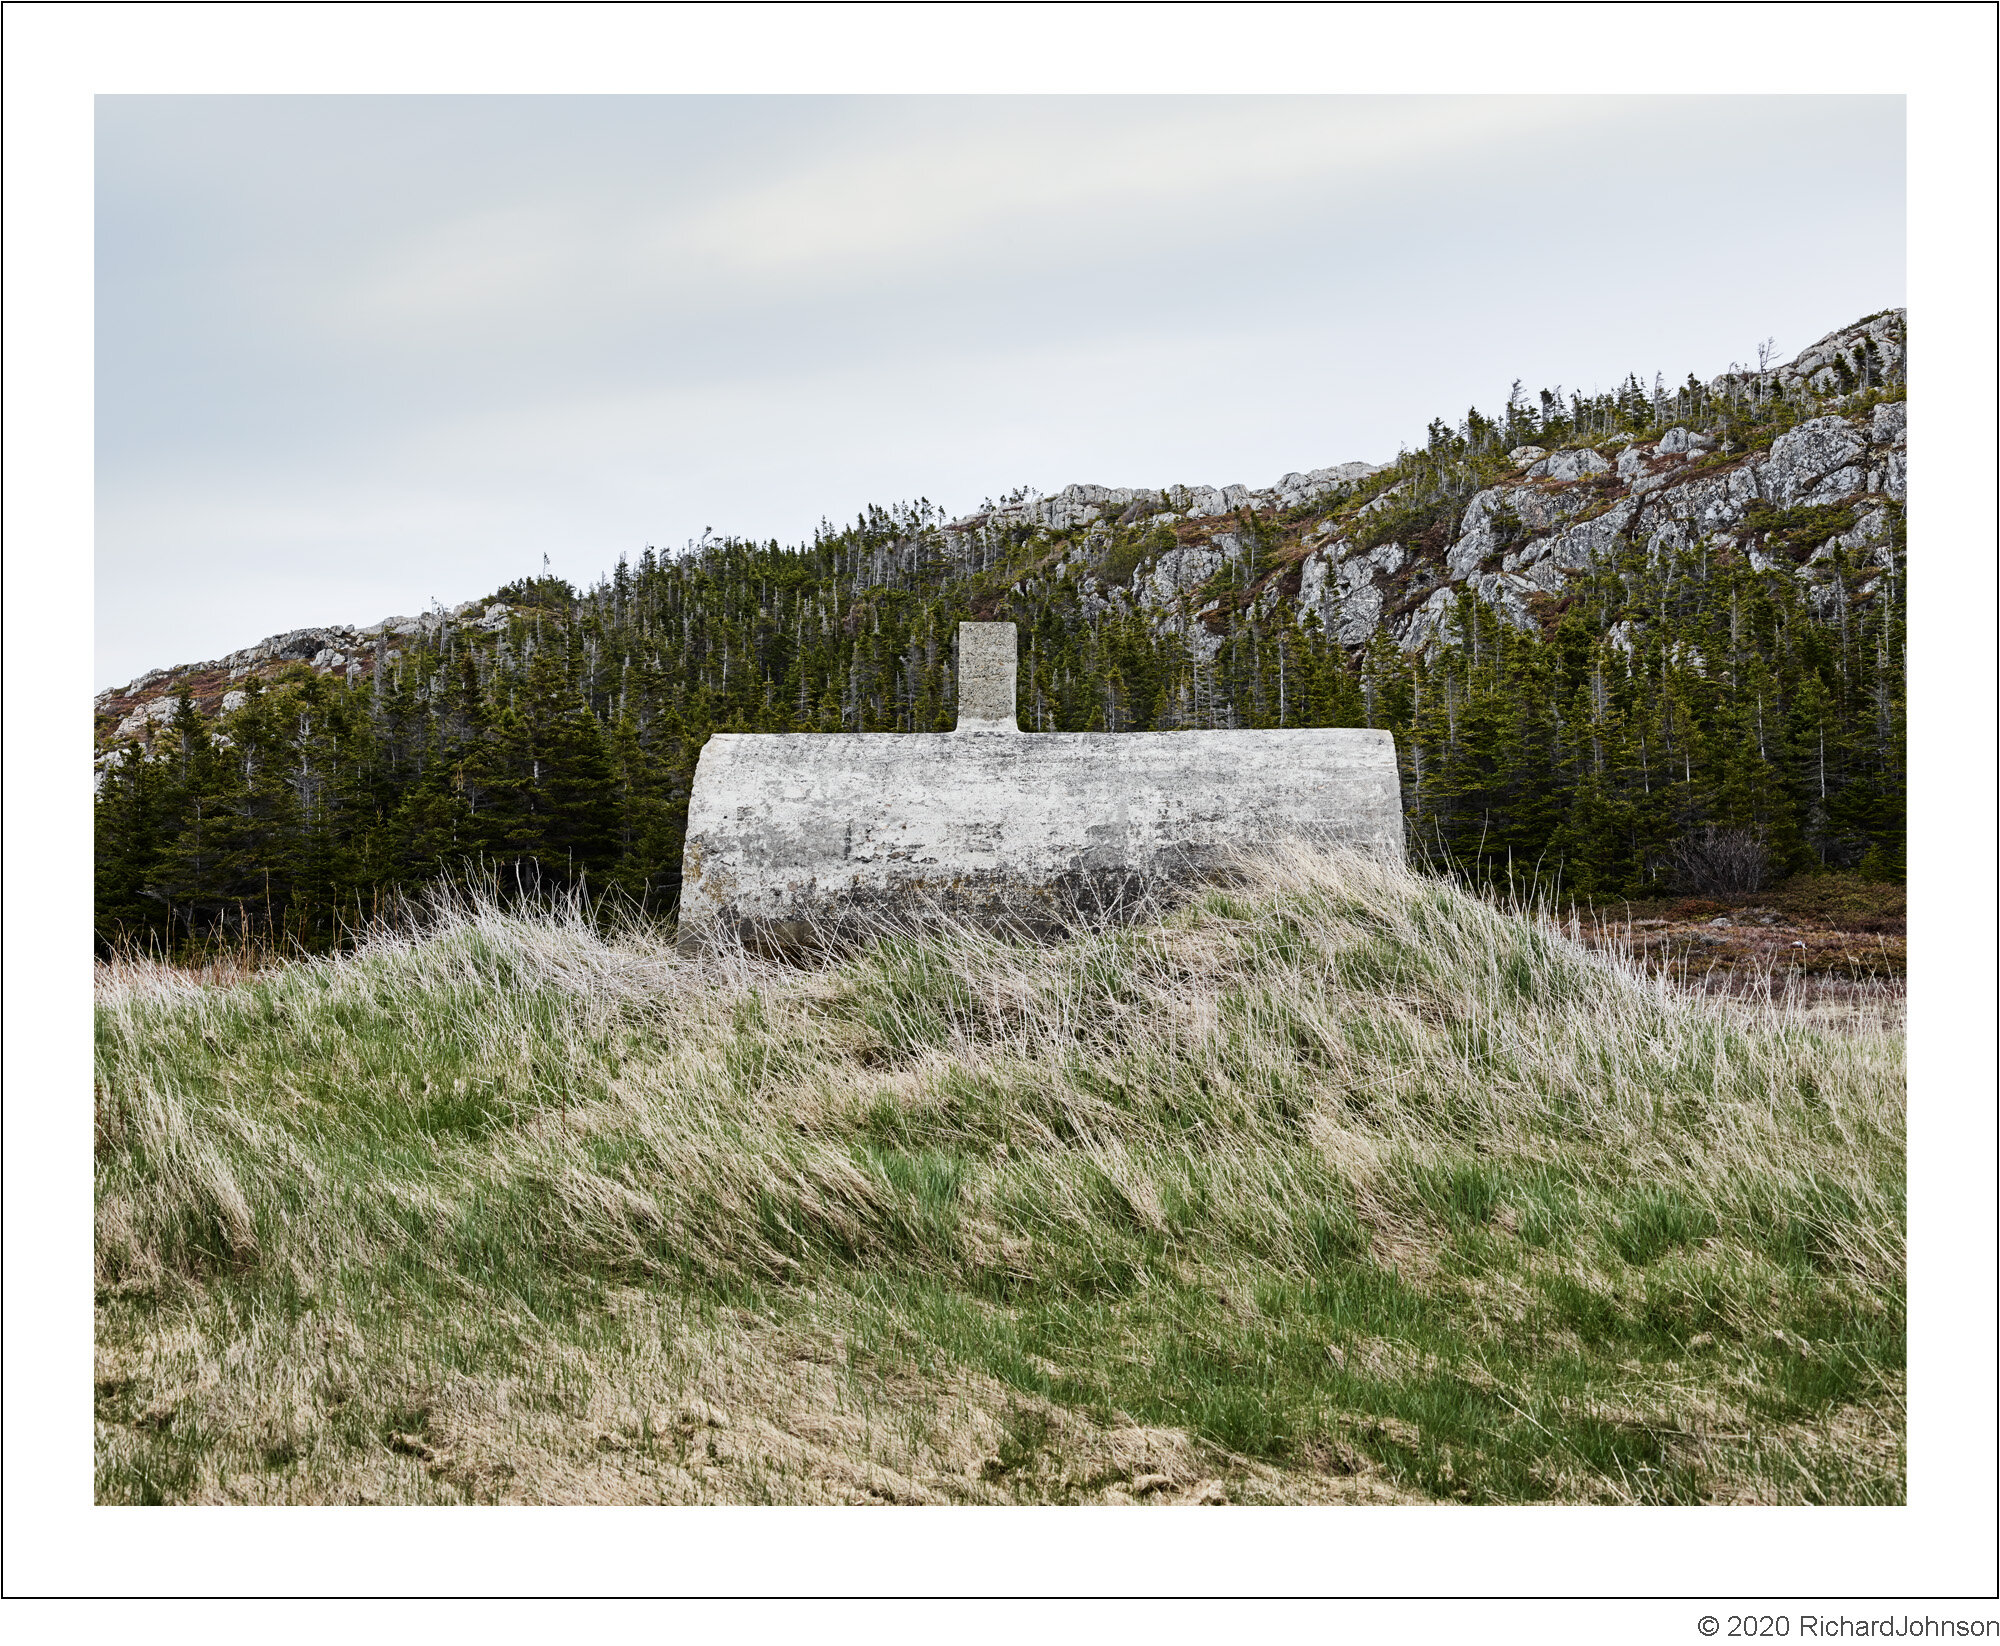 Root Cellar # 61-a, Lower Little Harbour Rd, Newfoundland, Canada, 2018